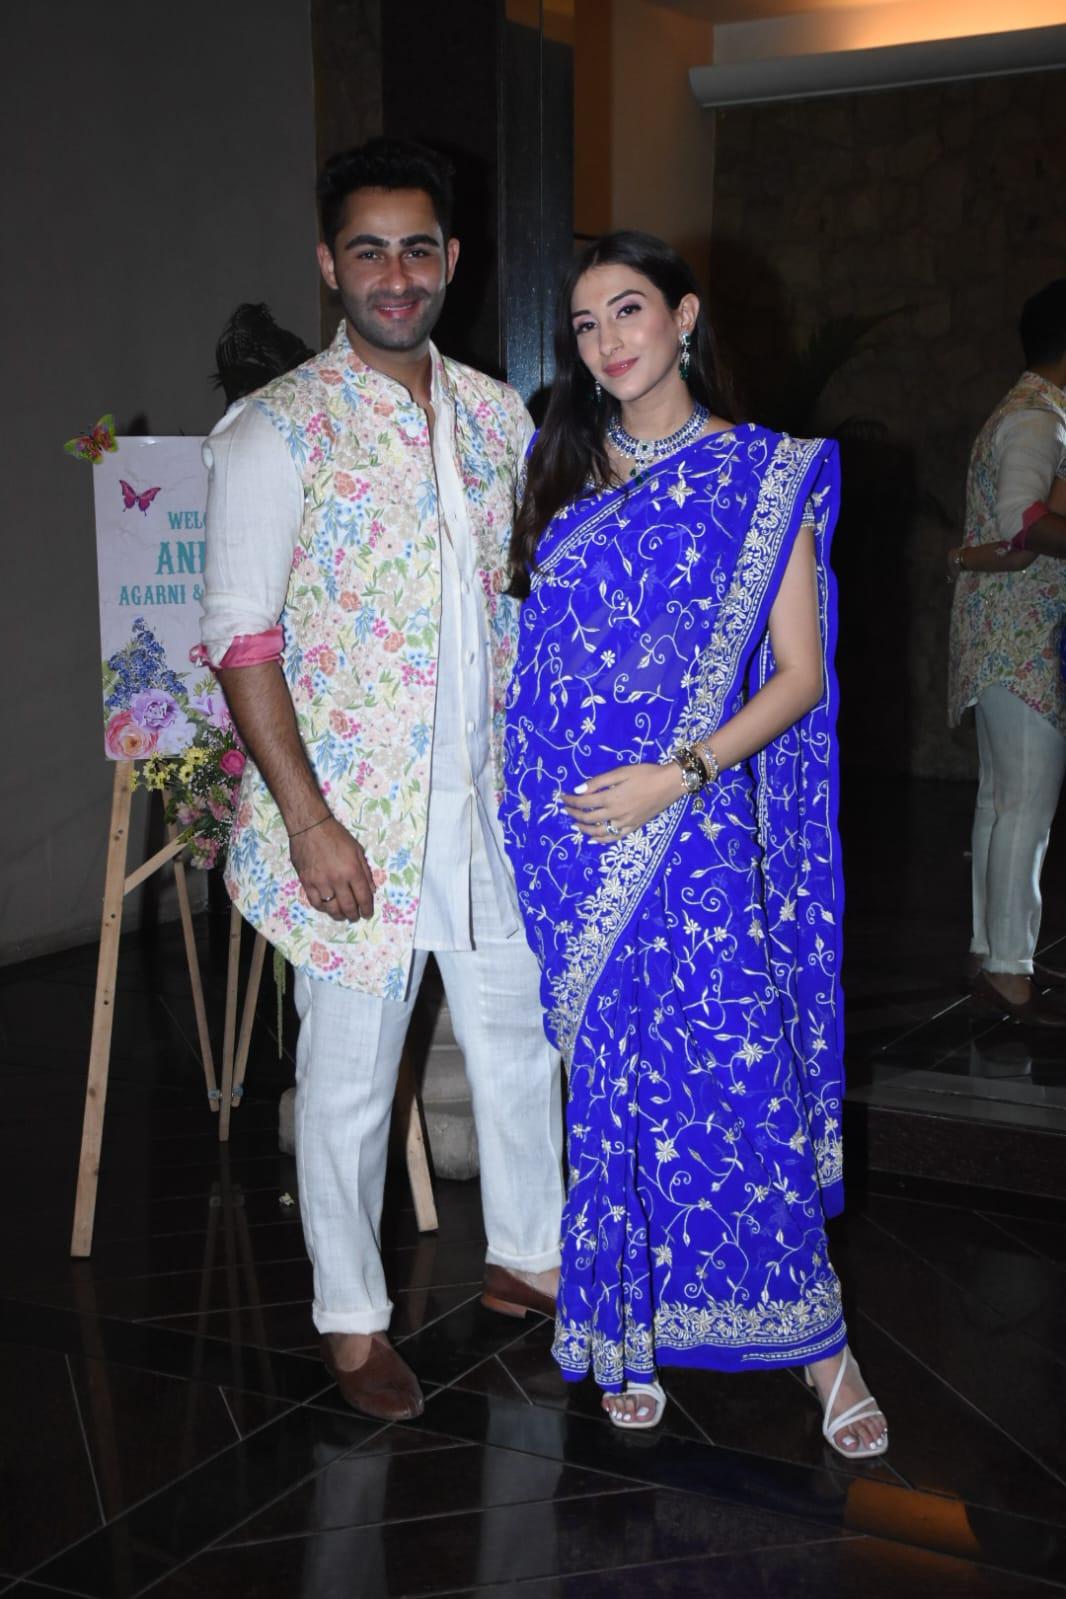 Armaan Jain and Anissa Malhotra tied in February 2020, and their wedding reception was star studded one. Now, the couple is all set to welcome their first child, and they hosted a baby shower that was attended by close friends and family members